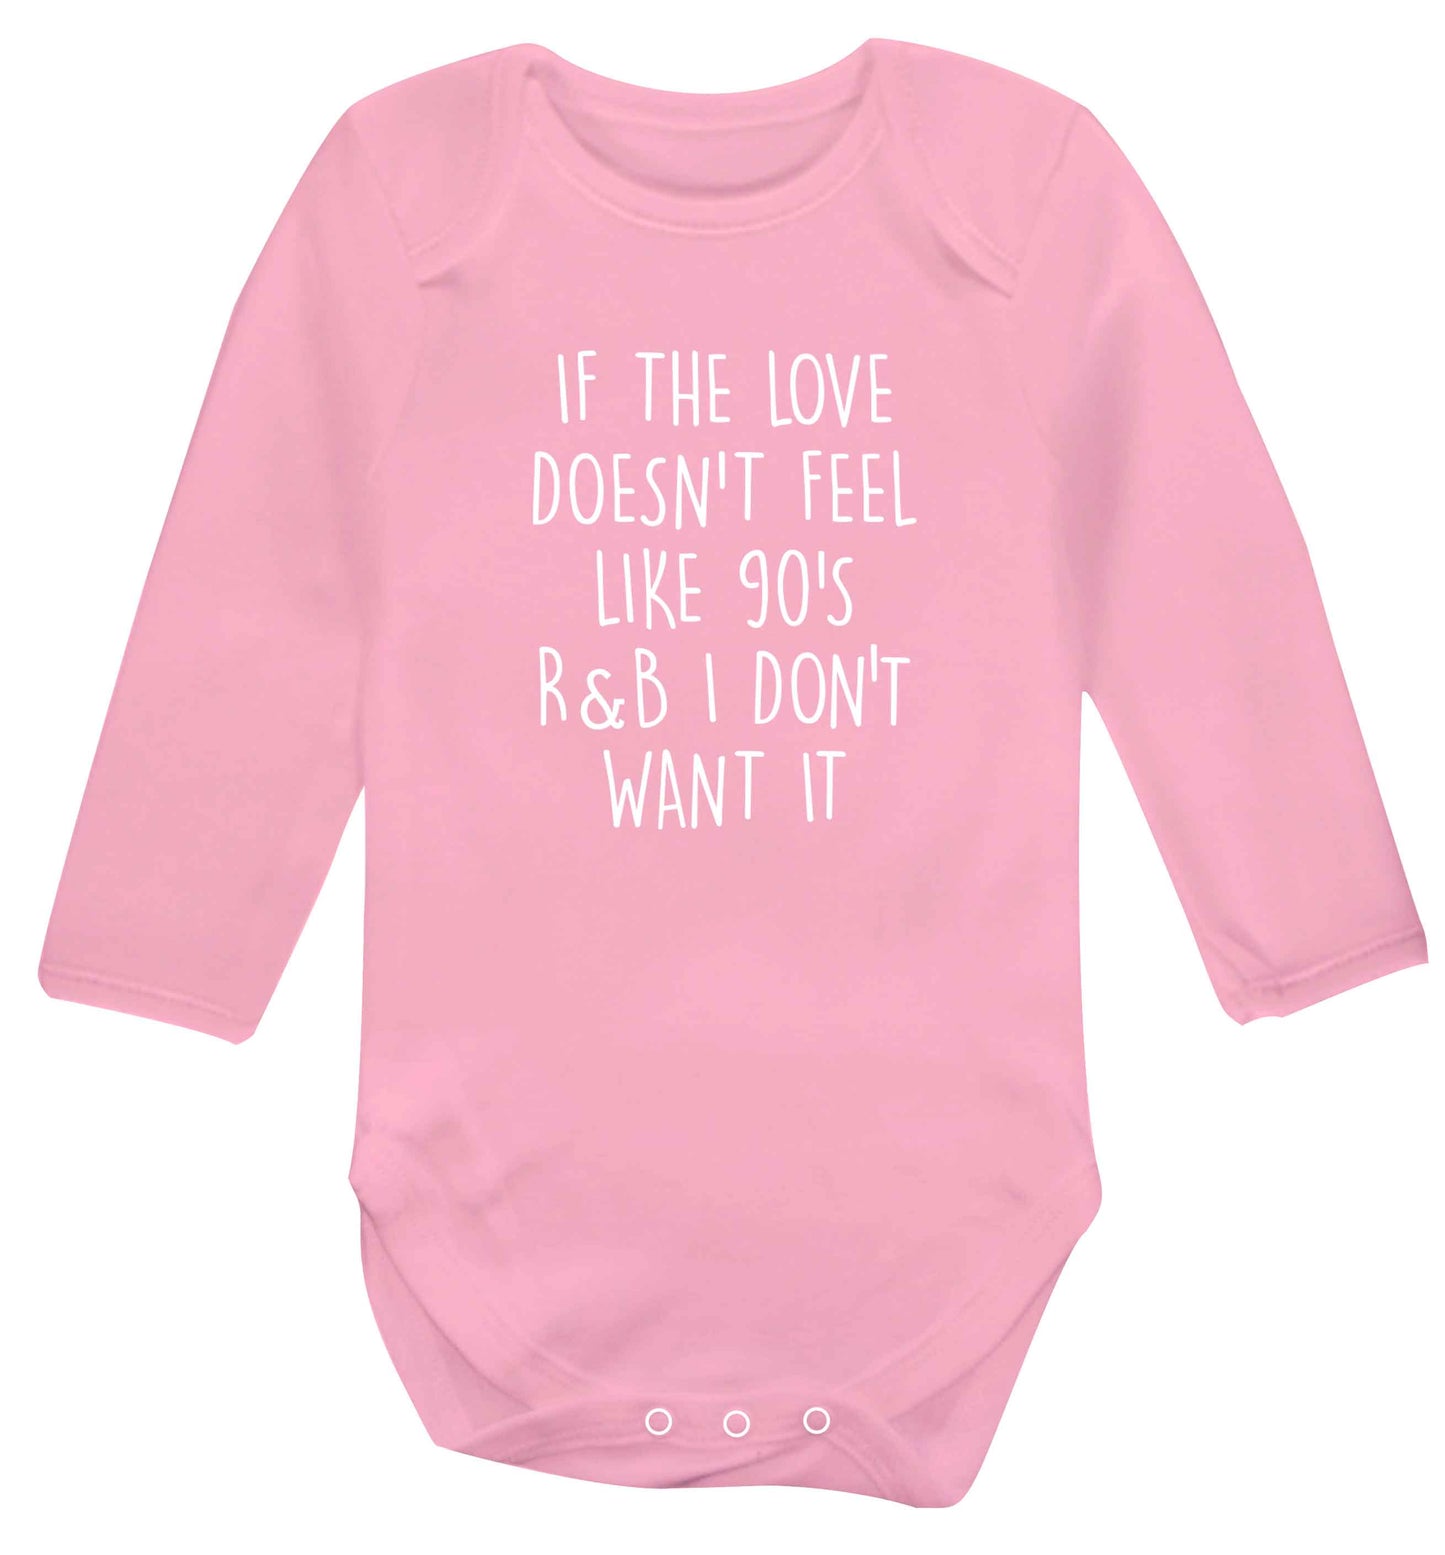 If the love doesn't feel like 90's r&b I don't want it baby vest long sleeved pale pink 6-12 months